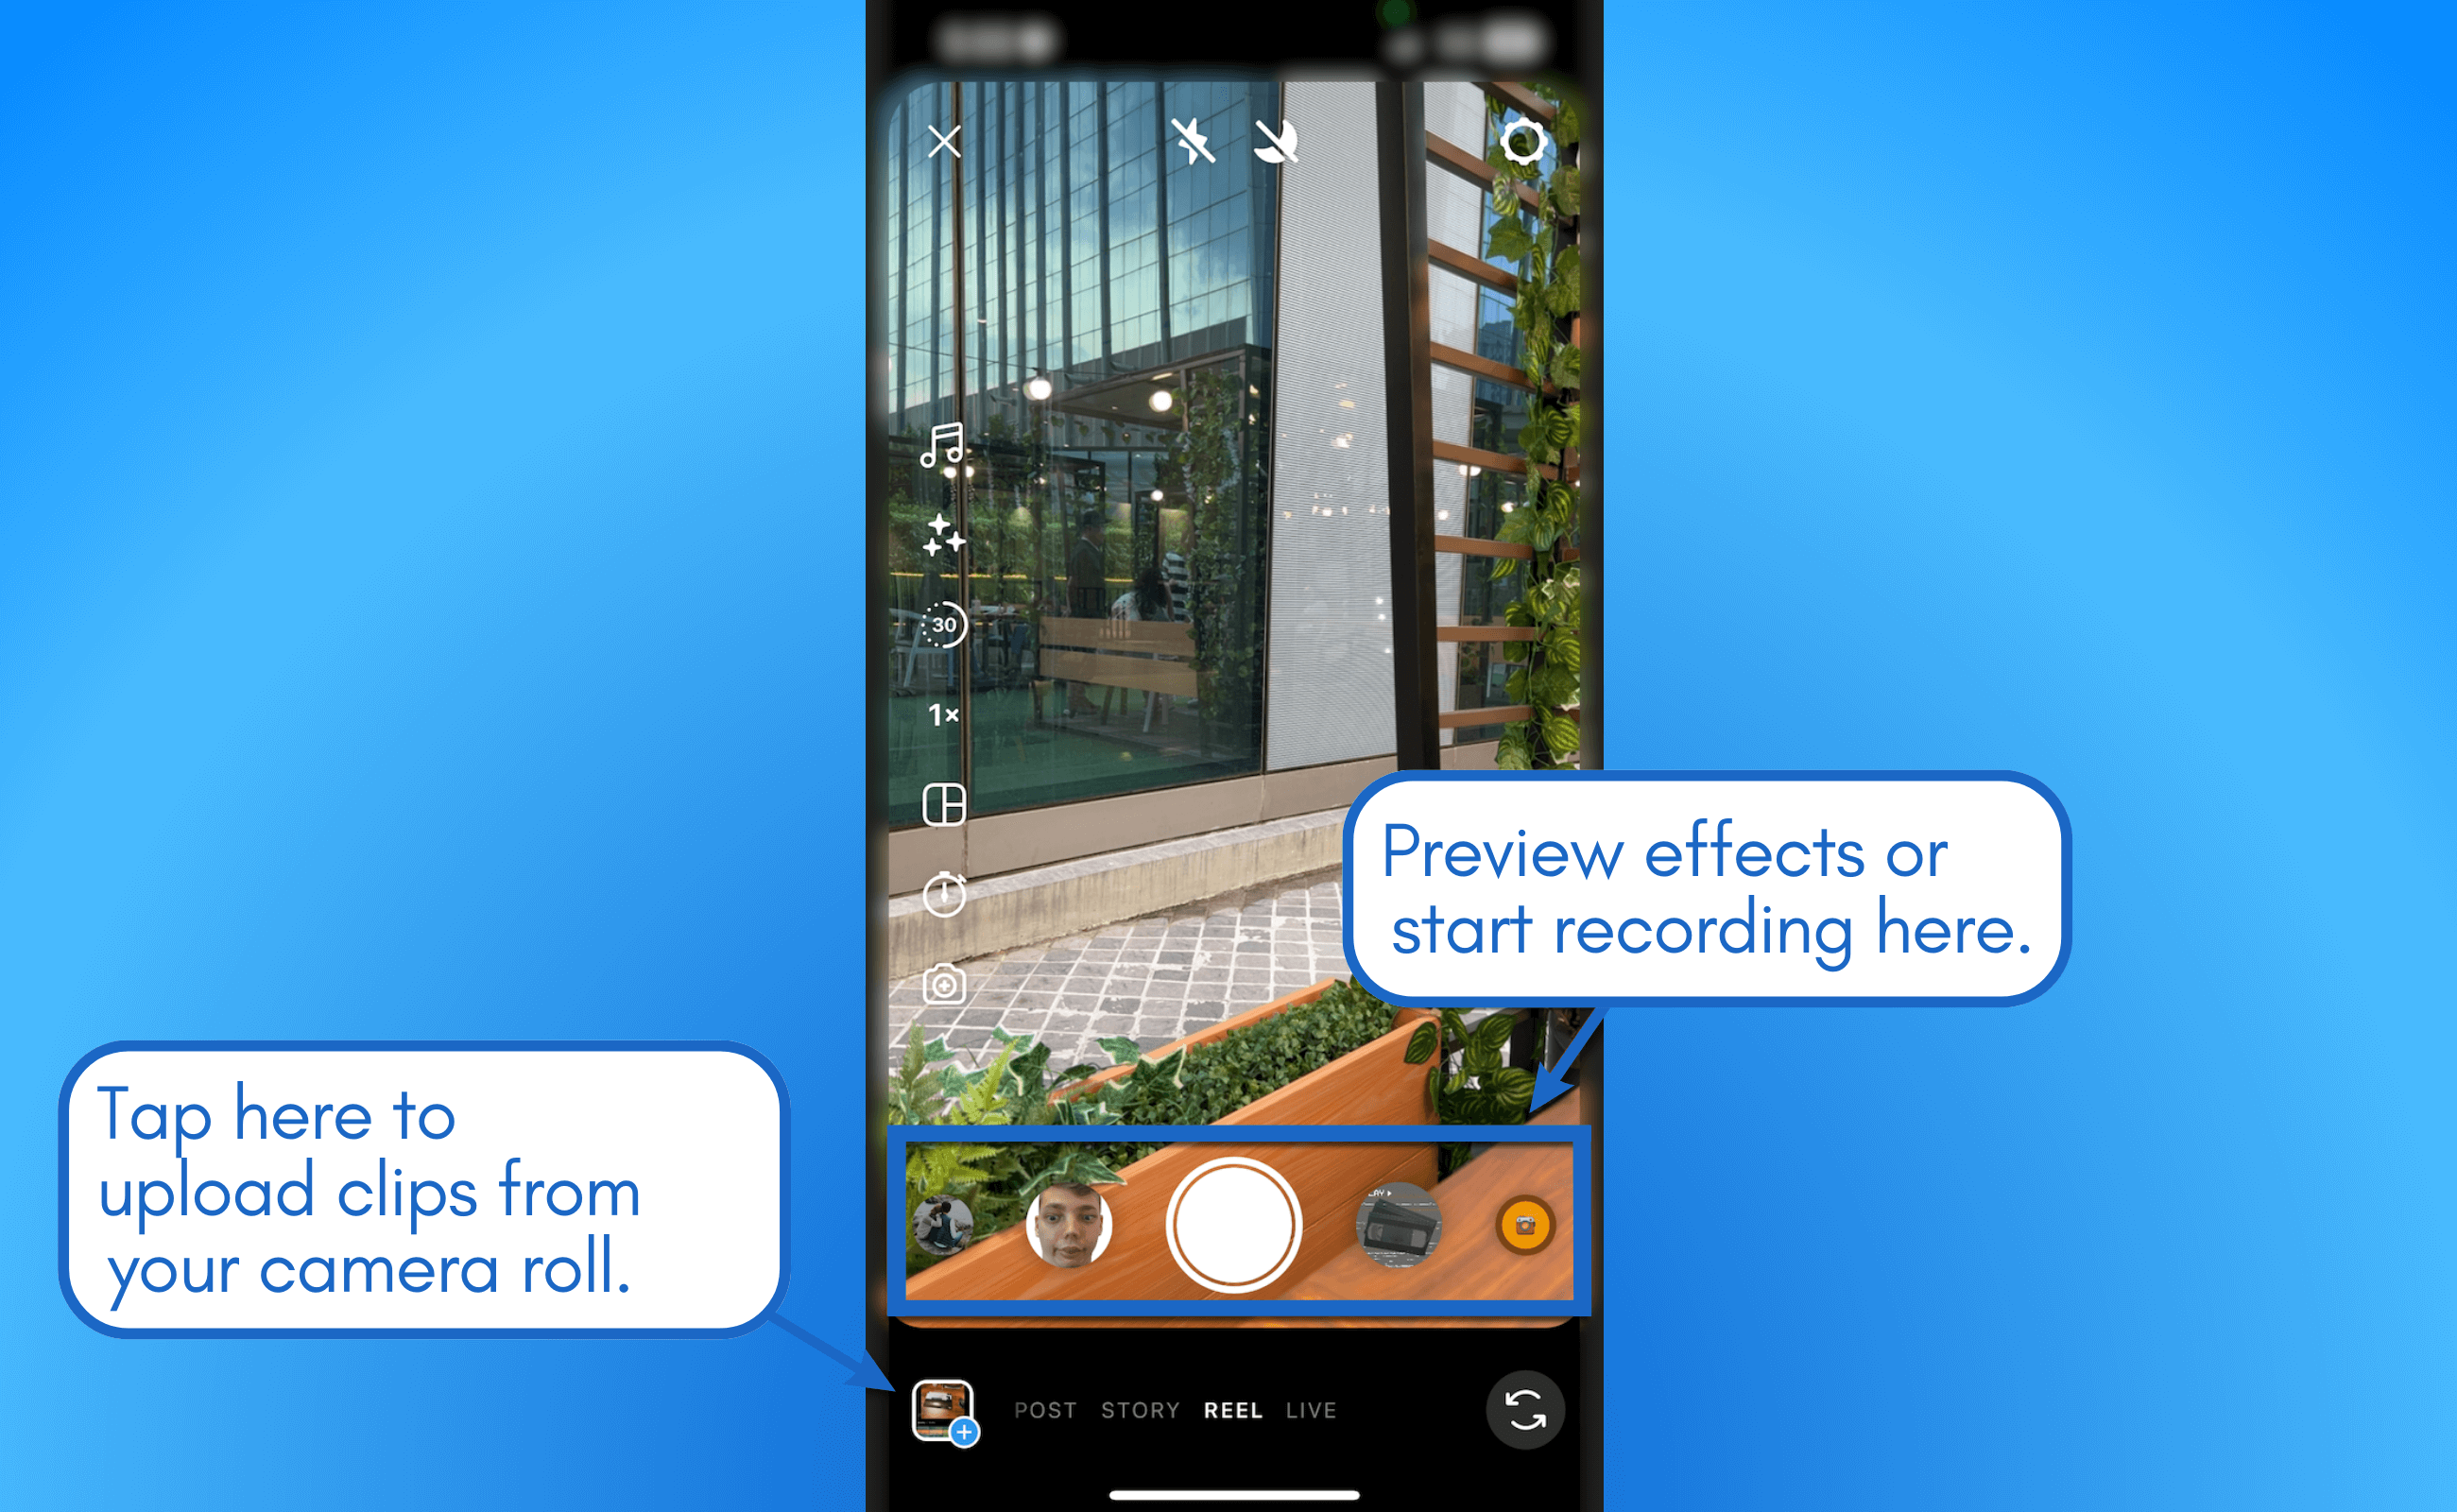 Preview effects or start recording.